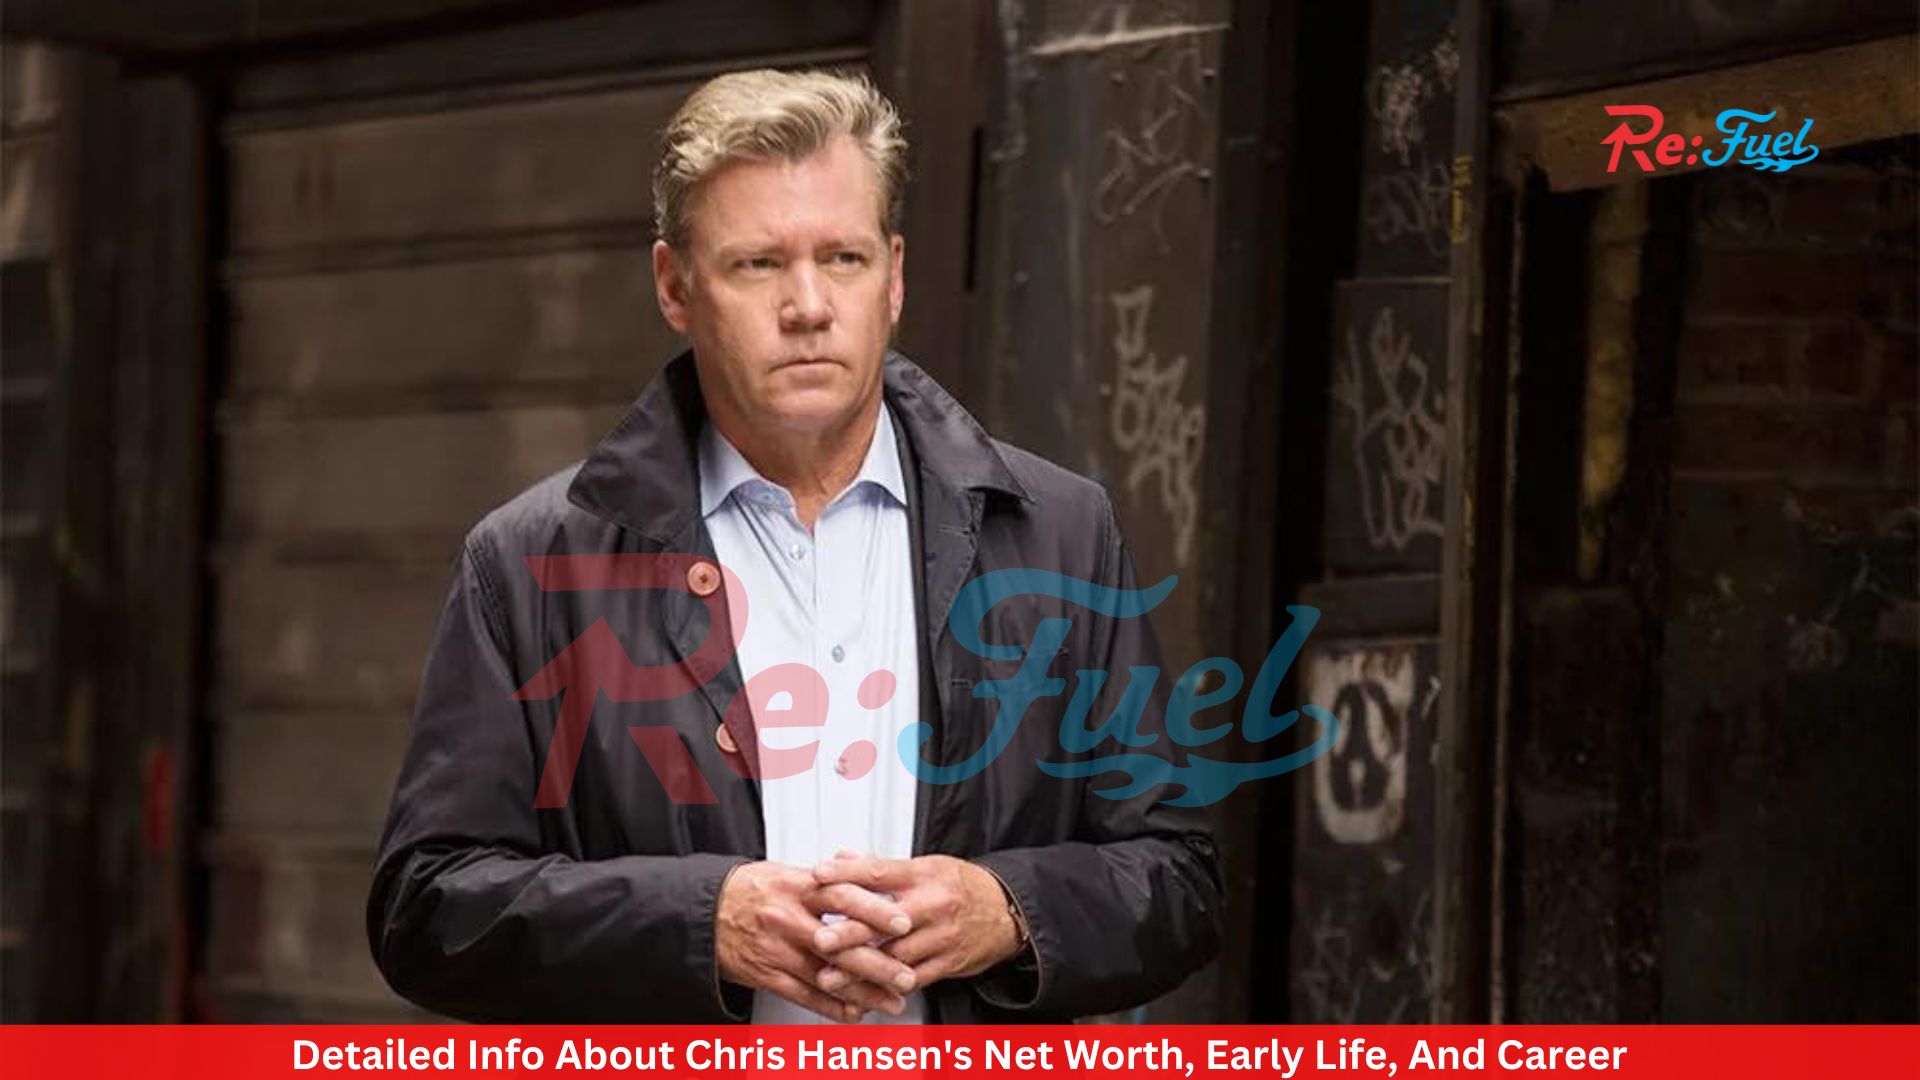 Detailed Info About Chris Hansen's Net Worth, Early Life, And Career